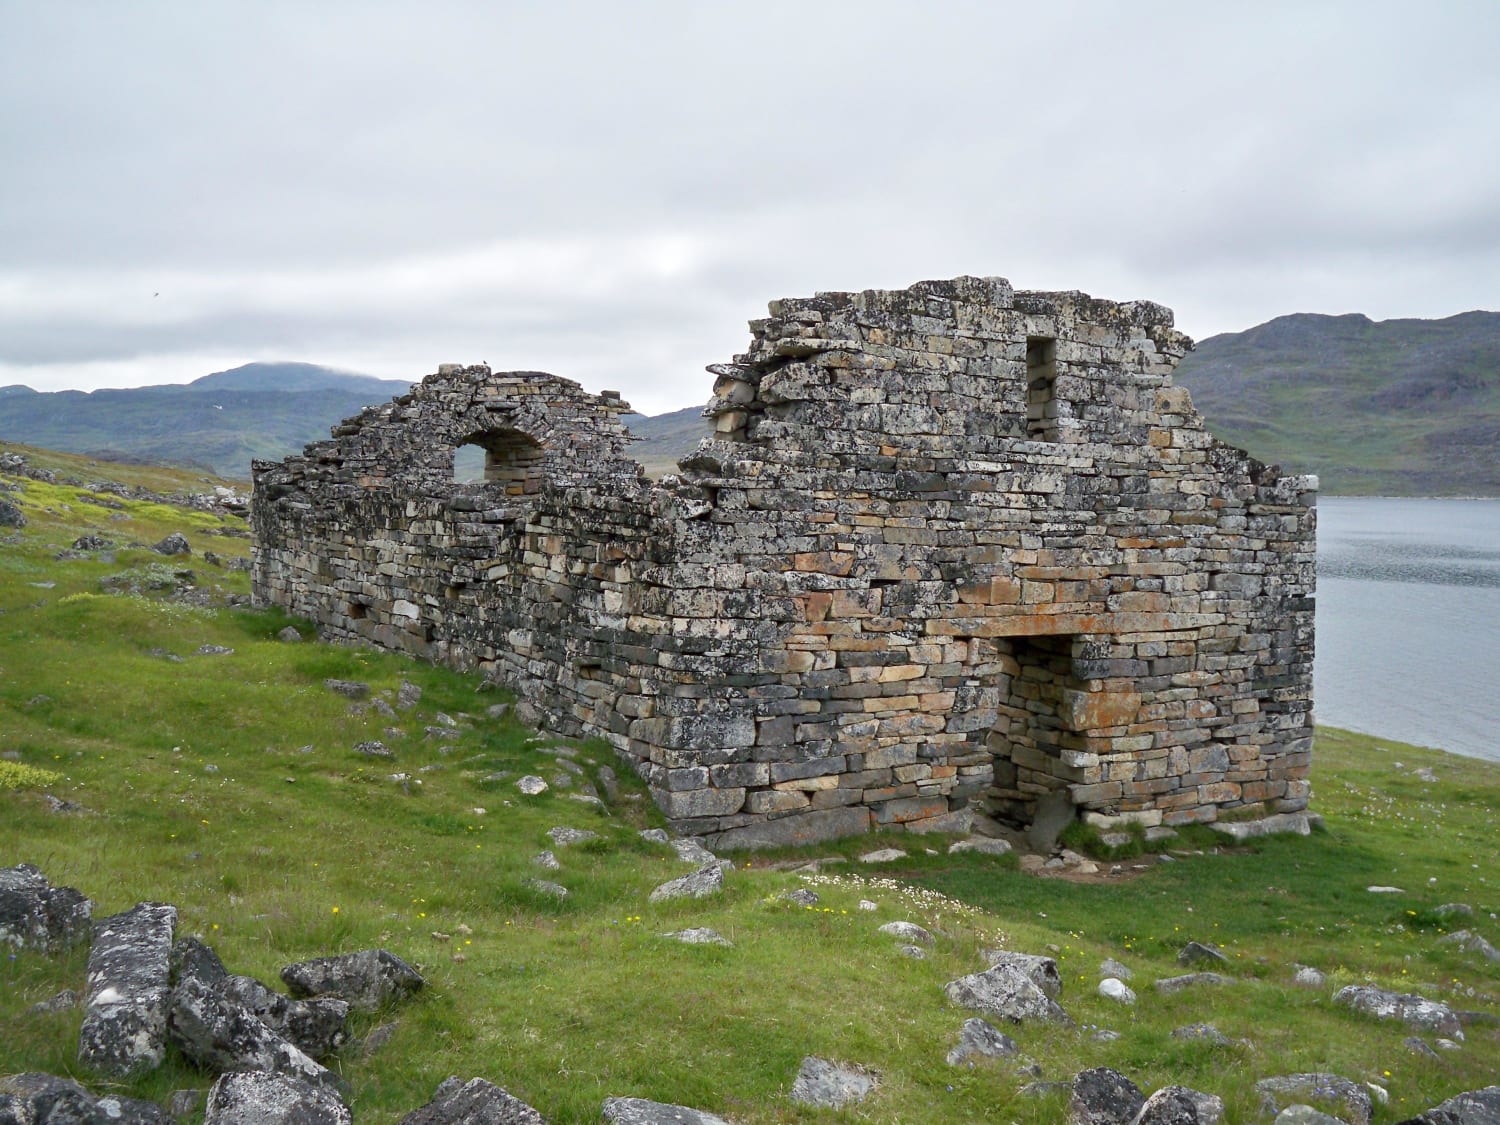 Hvalsey church, the best preserved Norse ruins in Greenland. It hosted the wedding of Thorstein Olafsson and Sigrid Björnsdóttir on either 14 or 16 September 1408. It is located in the abandoned Greenlandic/Norse settlement of Hvalsey, (now Qaqortoq) on the southern tip of Greenland.